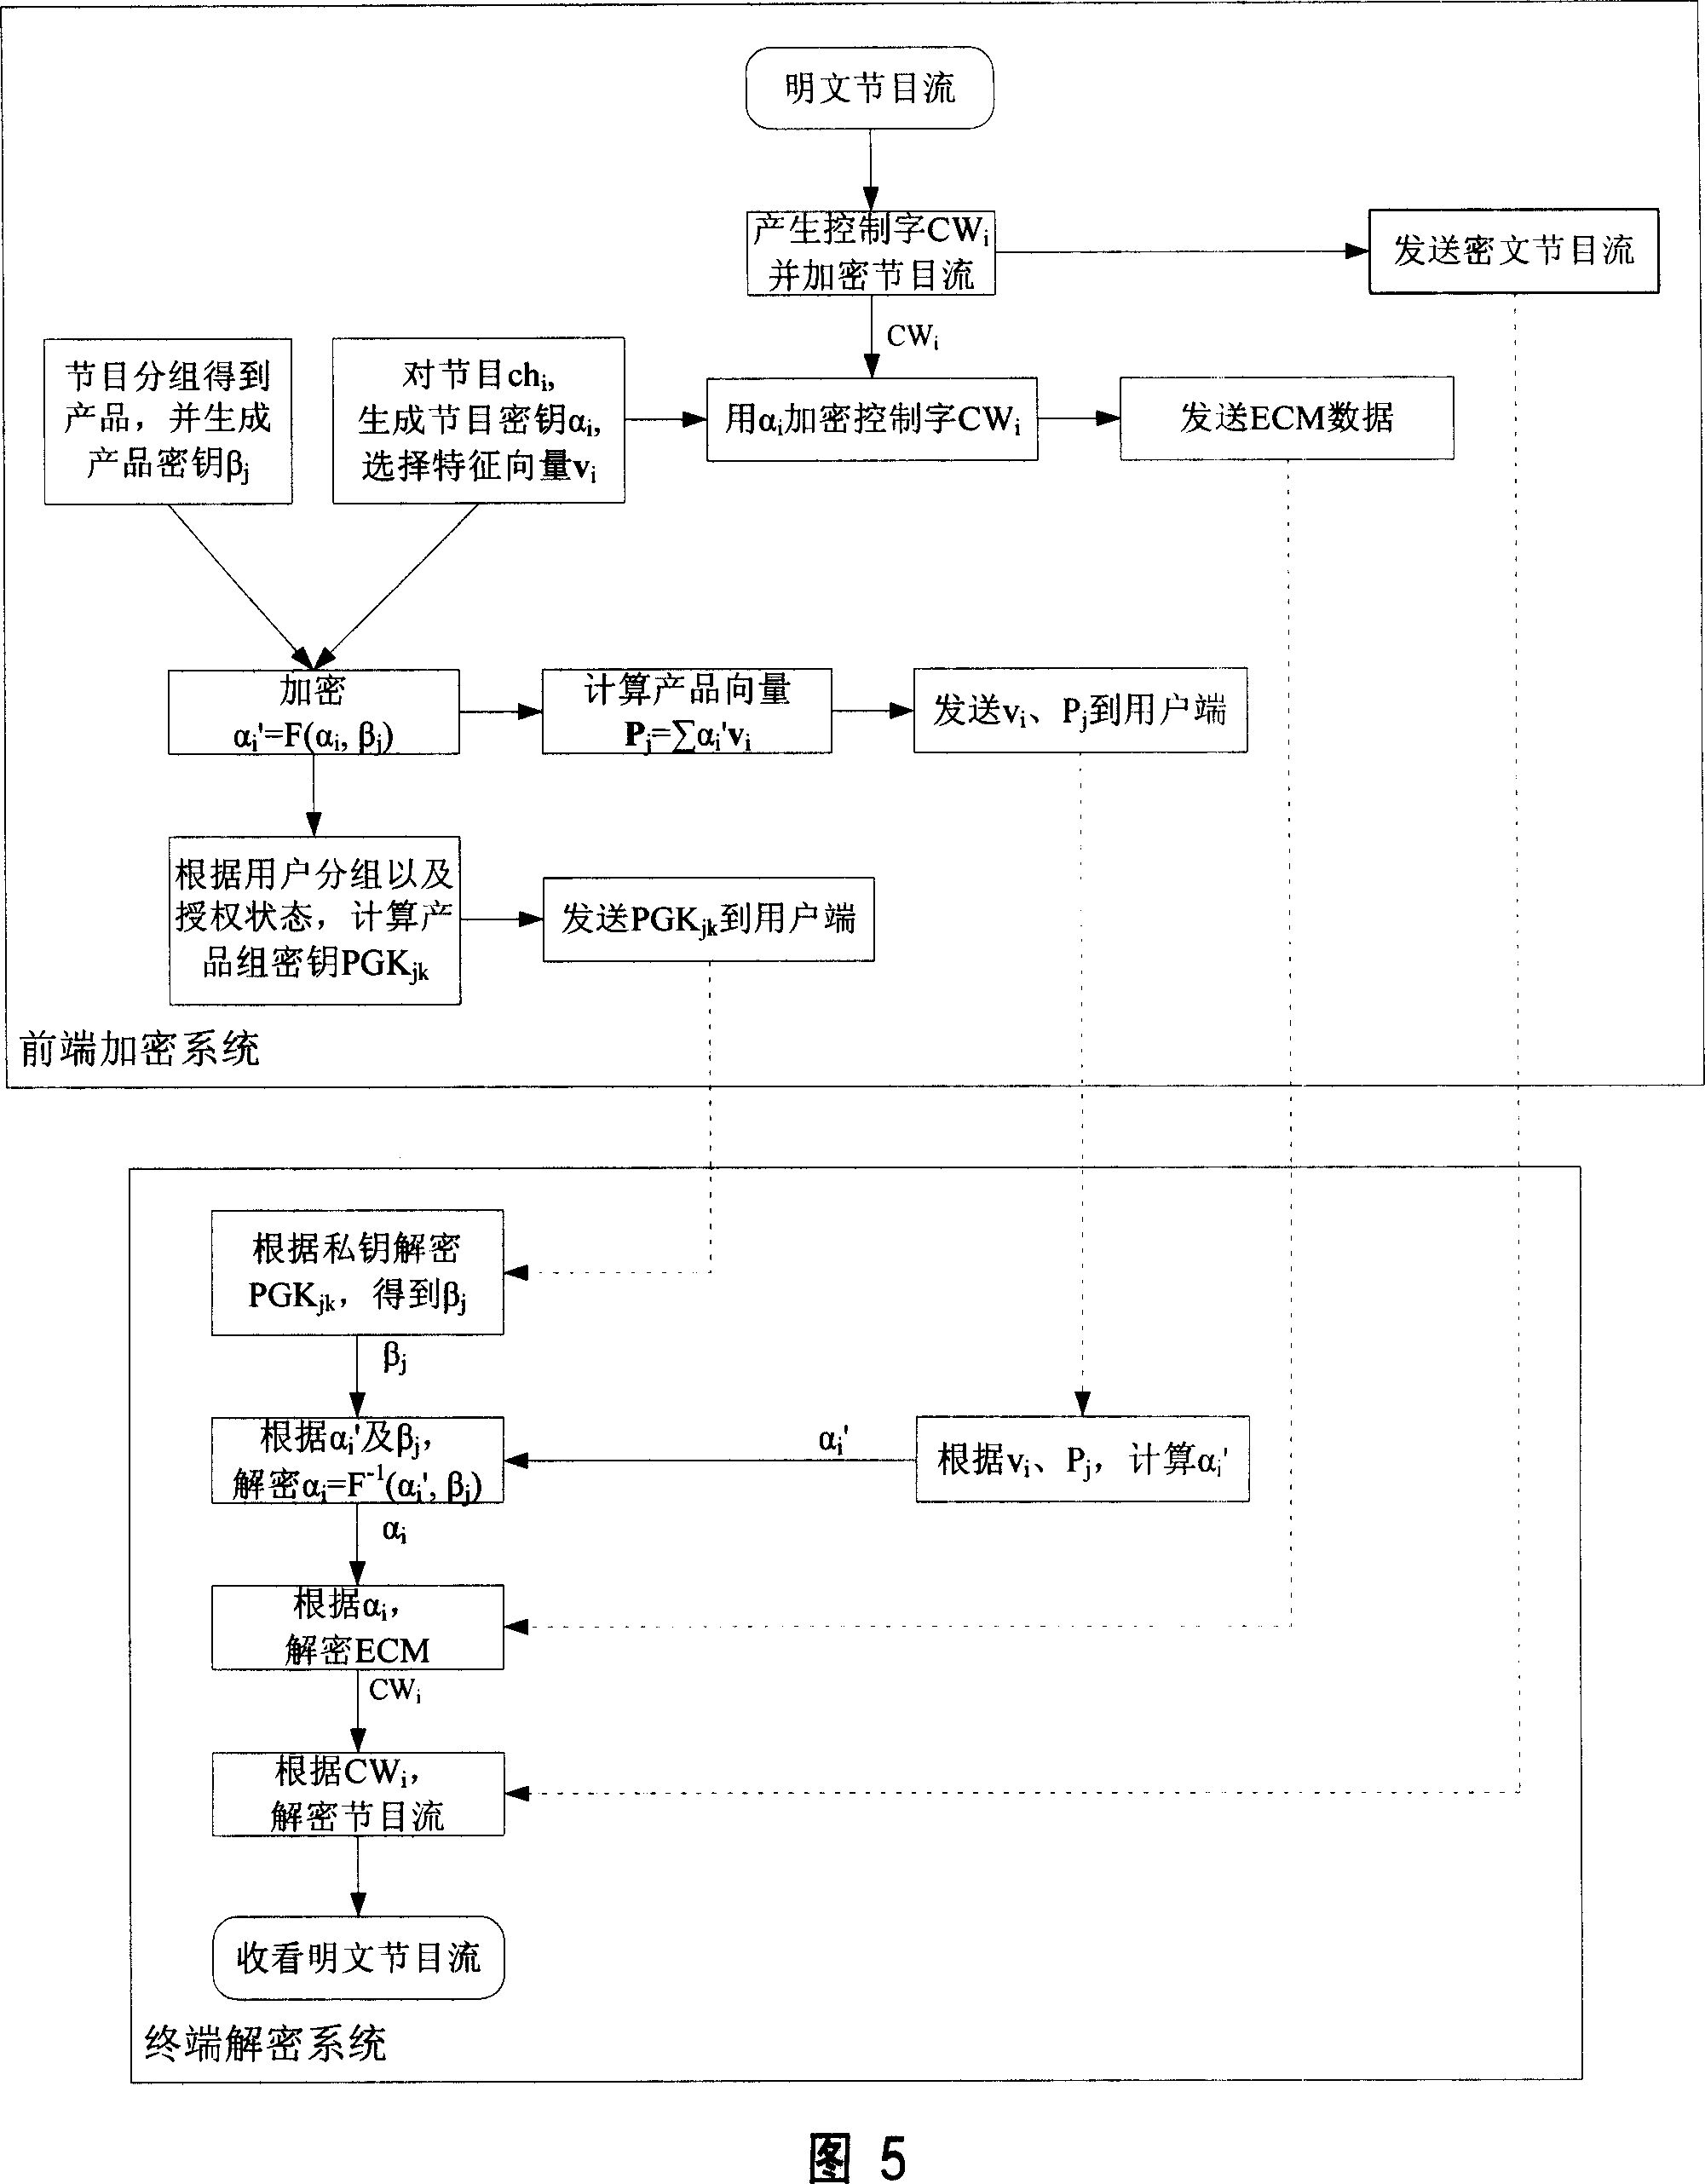 Secret key distributing method based on product and user separate packet for conditional access system